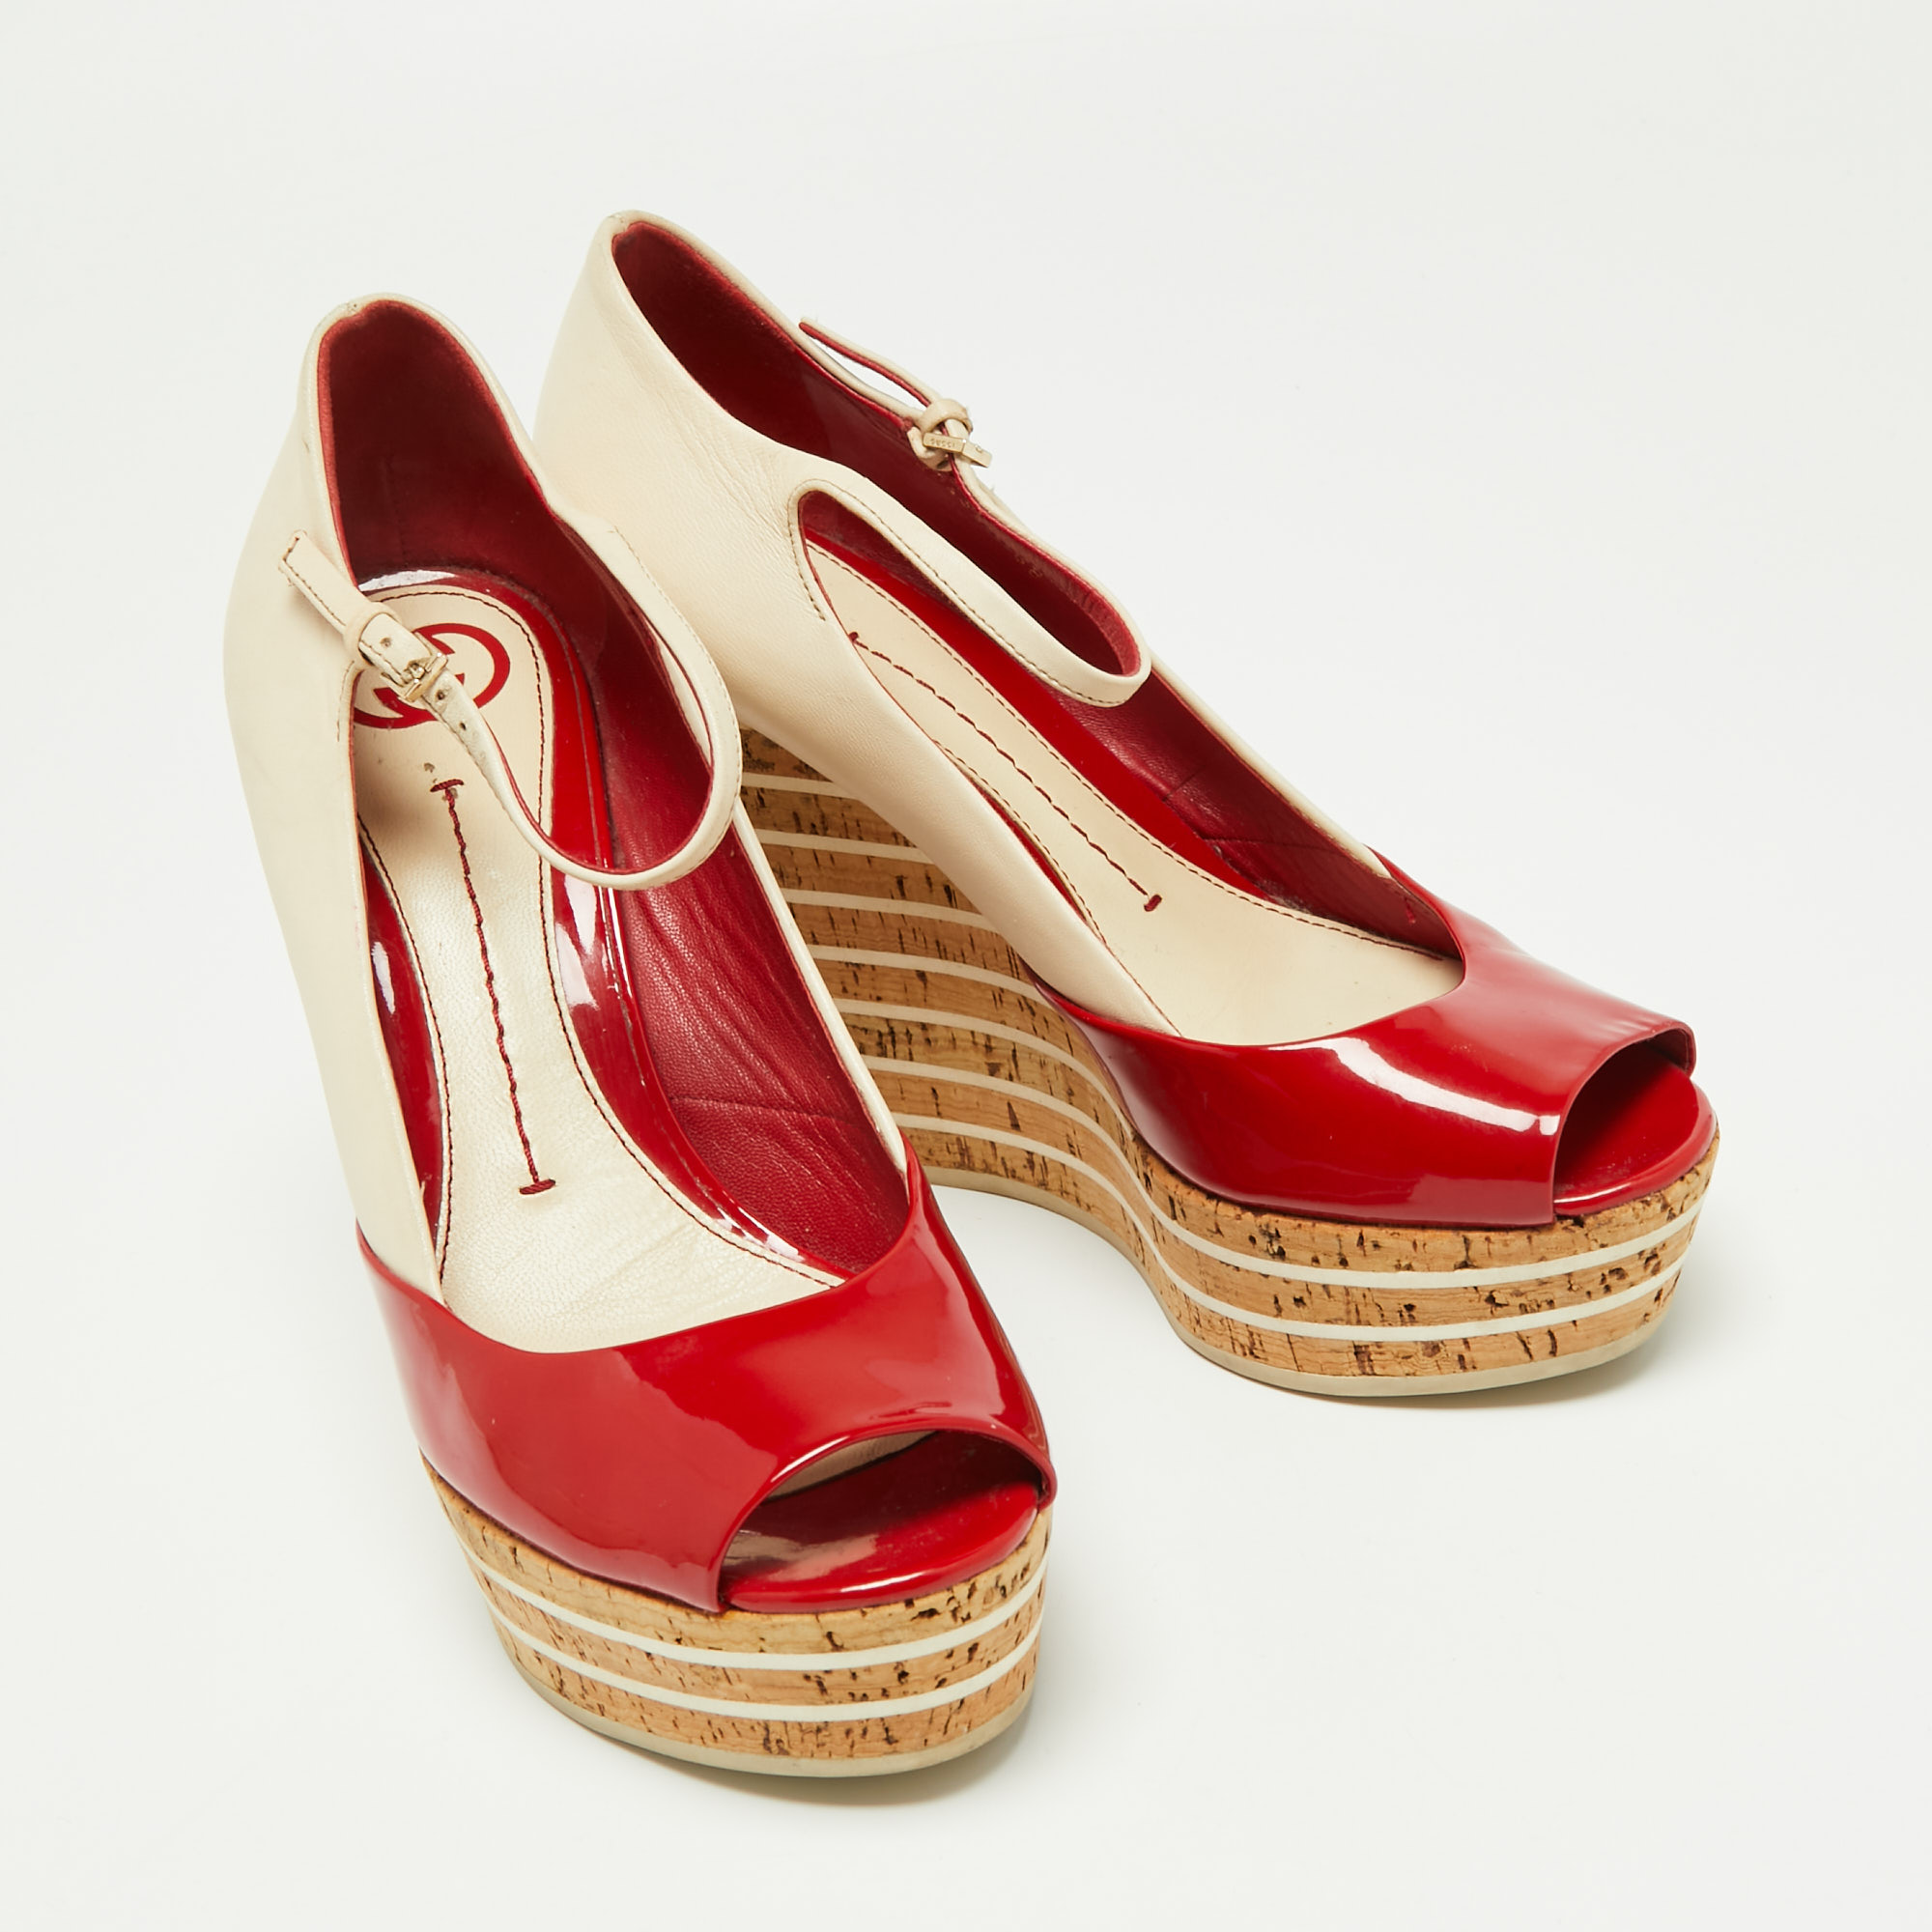 Gucci Red/Cream Patent Leather Colorblock Platform Wedge Mary Jane Peep Toe Pumps Size 38